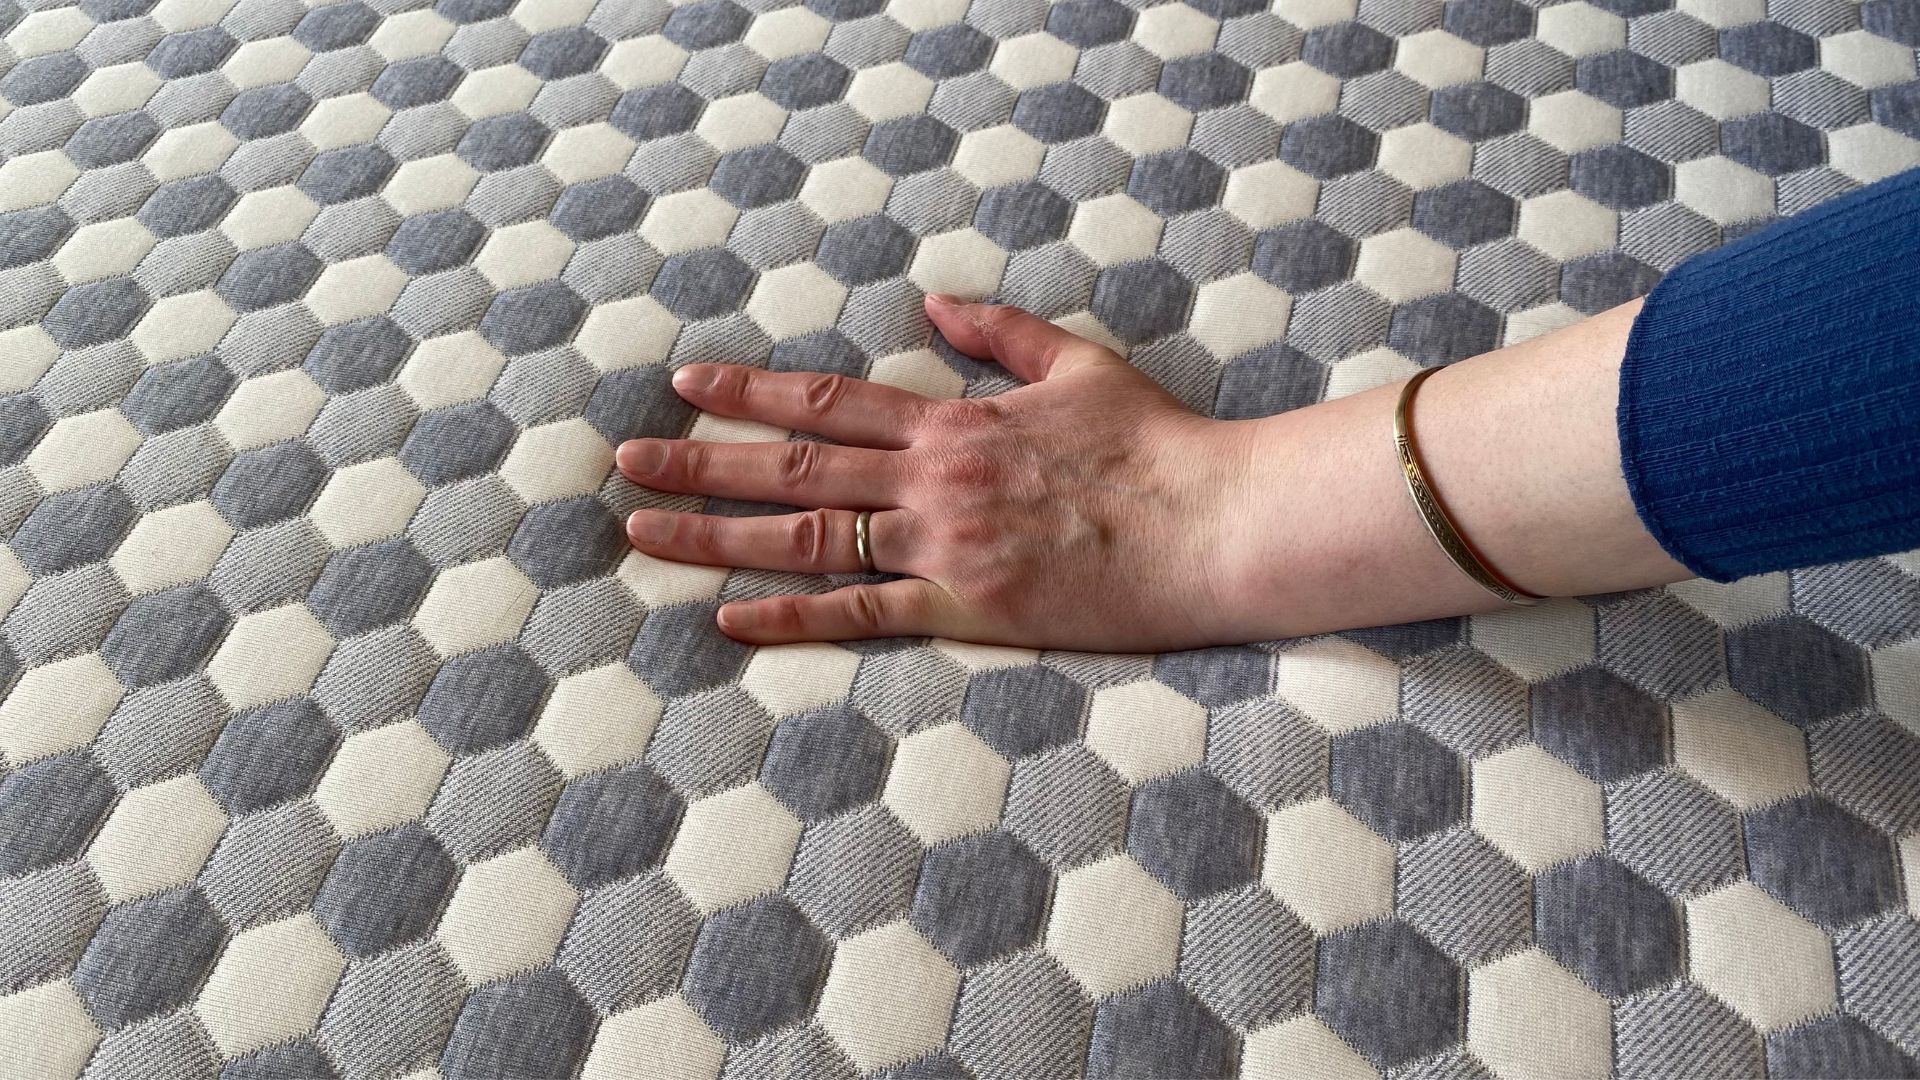 A woman places her hand on the cover of the Otty Firm Hybrid mattress to see how cool it is